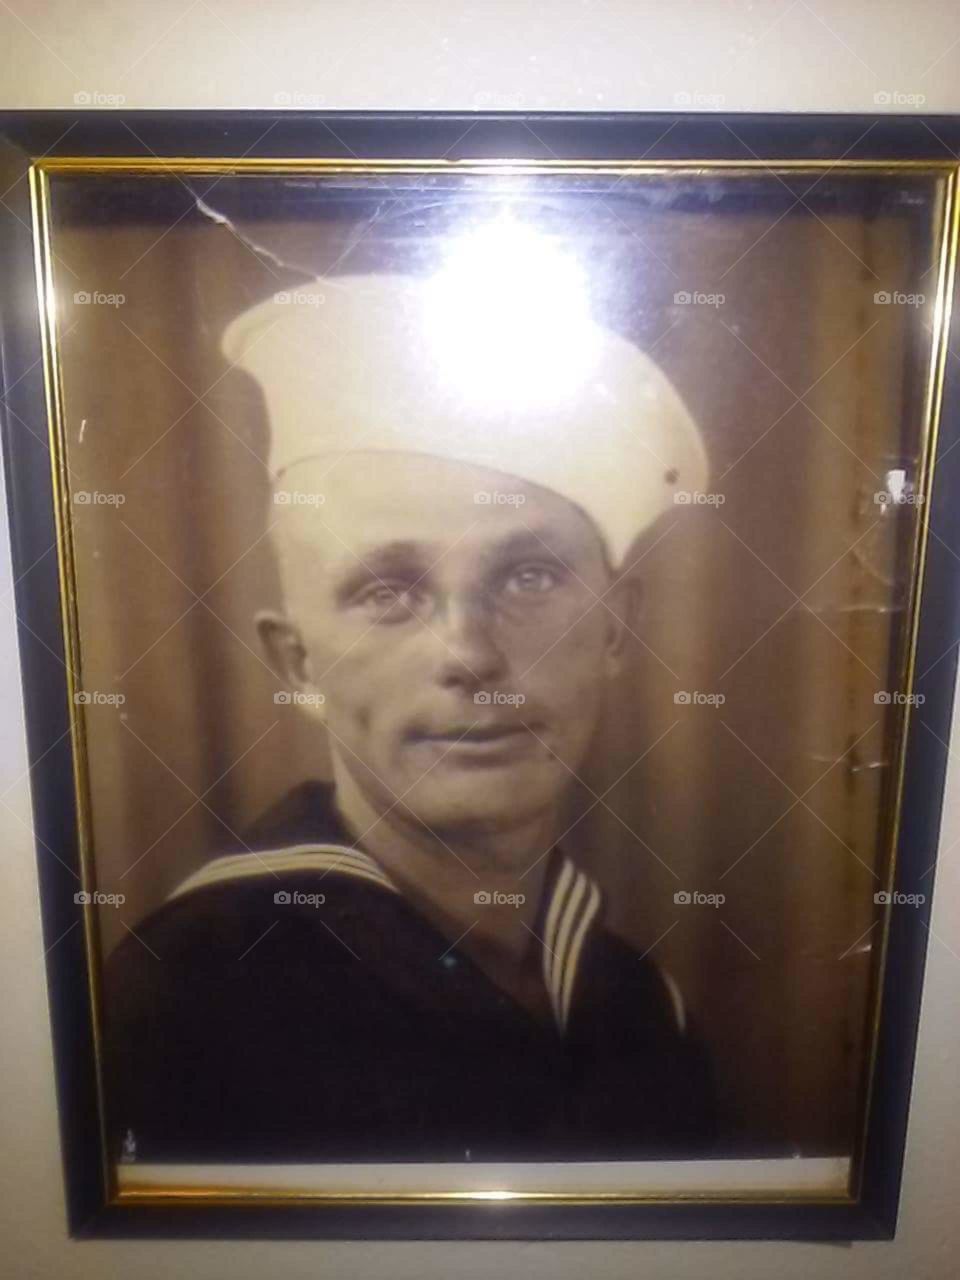 World War 2 Military Veteran. my grandfather served in the Army and Navy during World War 2. Olan Marks